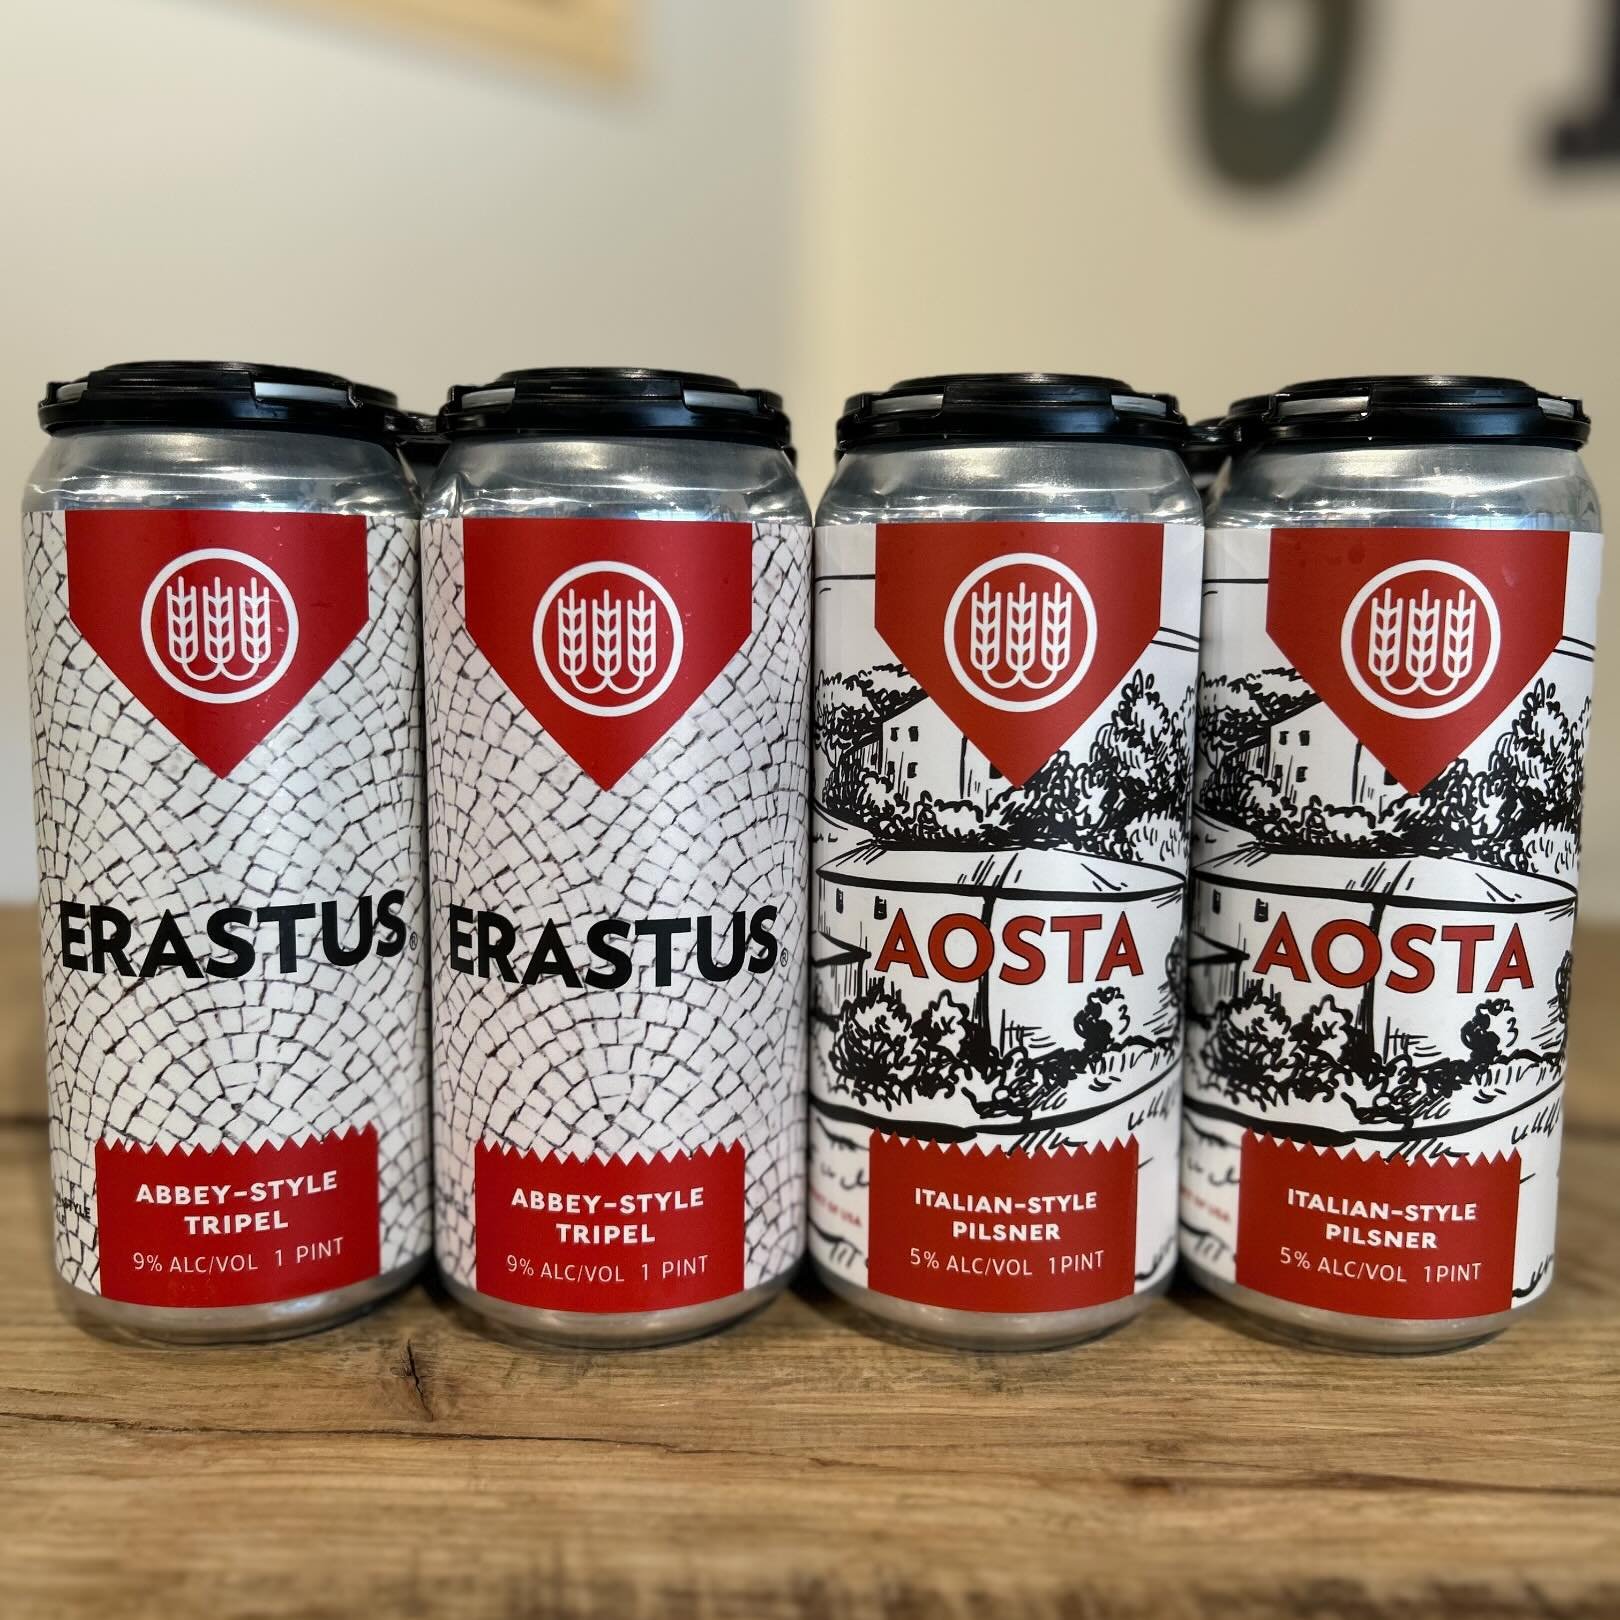 Fresh @schillingbeerco #NowAvailable #SudburyCraftBeer #TheSuds
&mdash;
Erastus, a dry, spicy, and complex Belgian-style ale inspired by Trappists. Aroma and flavor marked by the marriage of peppery spice, citrus, and pear. Noble hops assertively uti